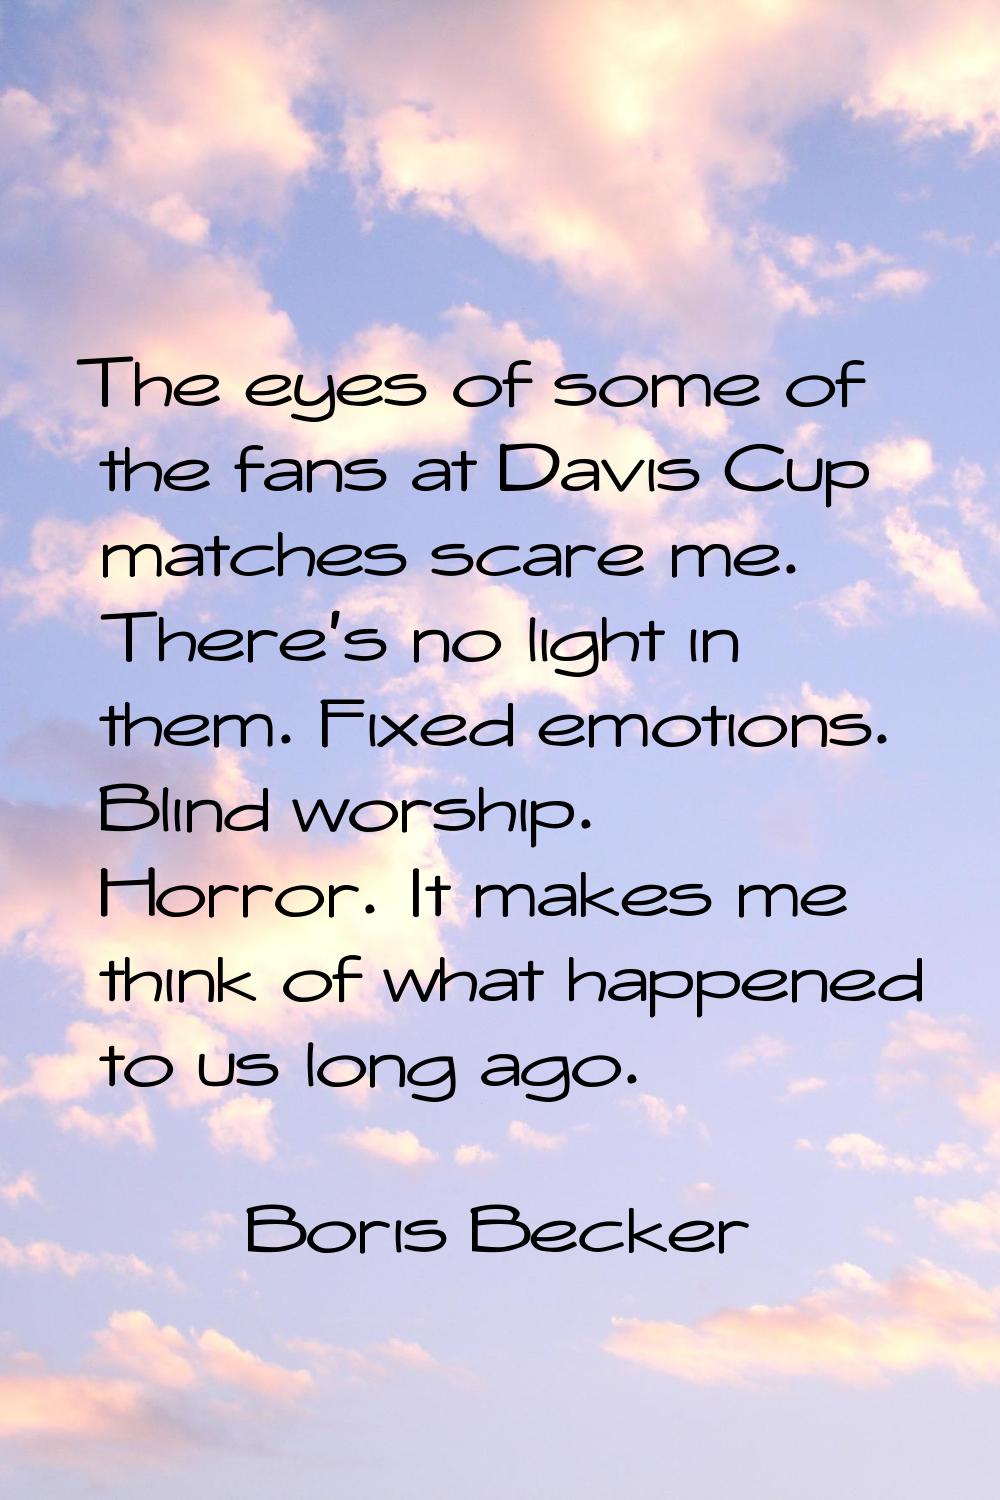 The eyes of some of the fans at Davis Cup matches scare me. There's no light in them. Fixed emotion